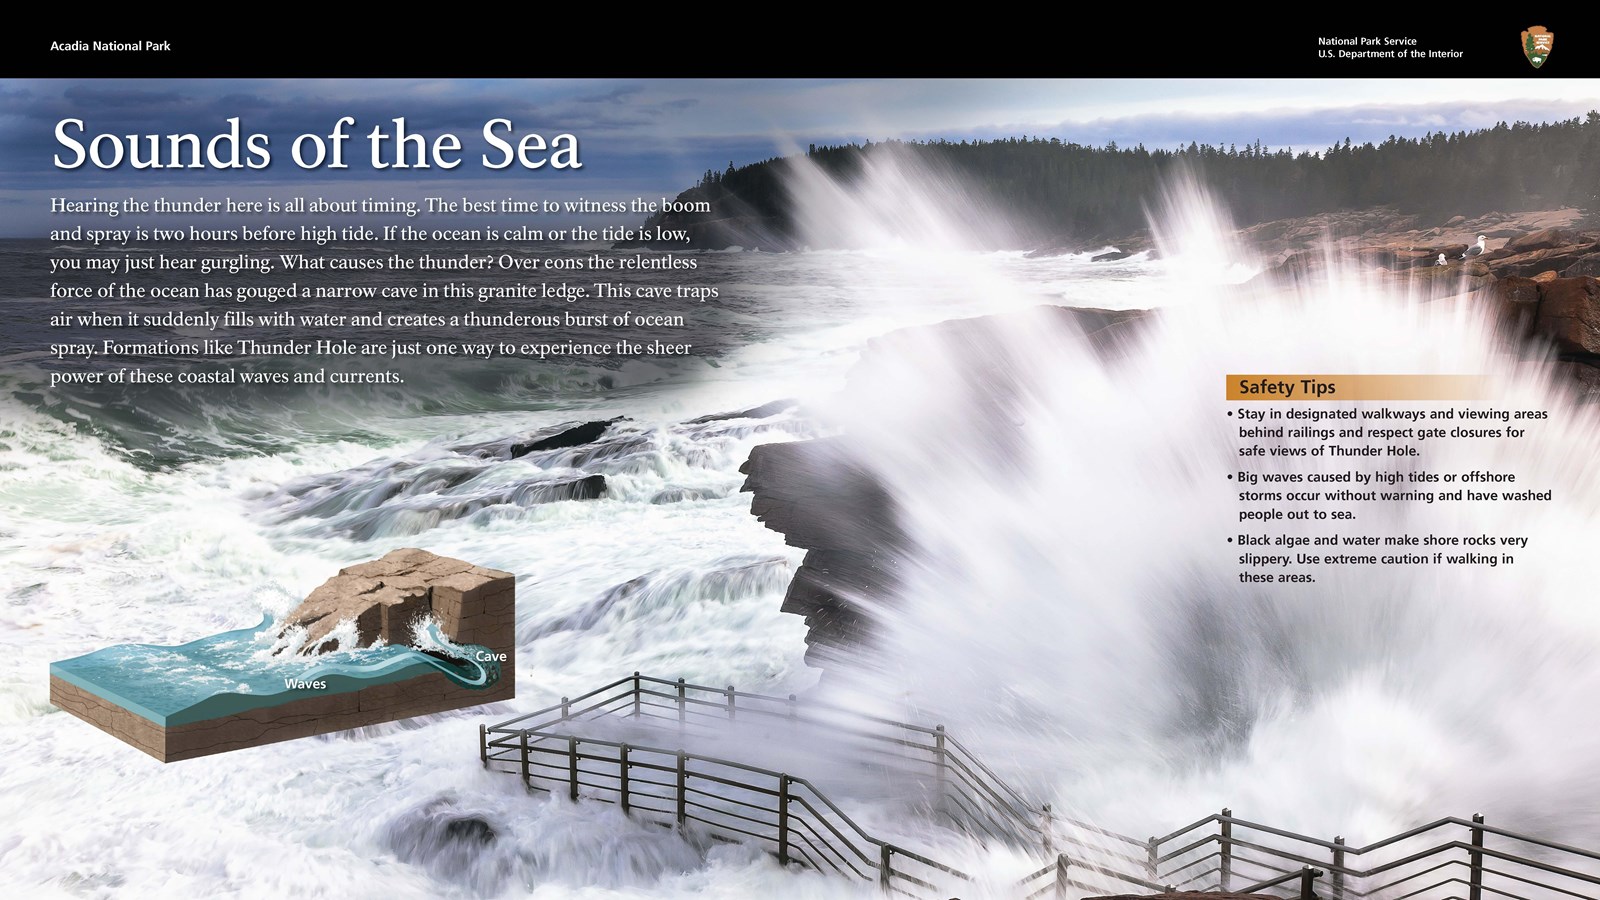 Title: Sounds of the Sea; Background image of waves crashing high over a walkway and rocks.